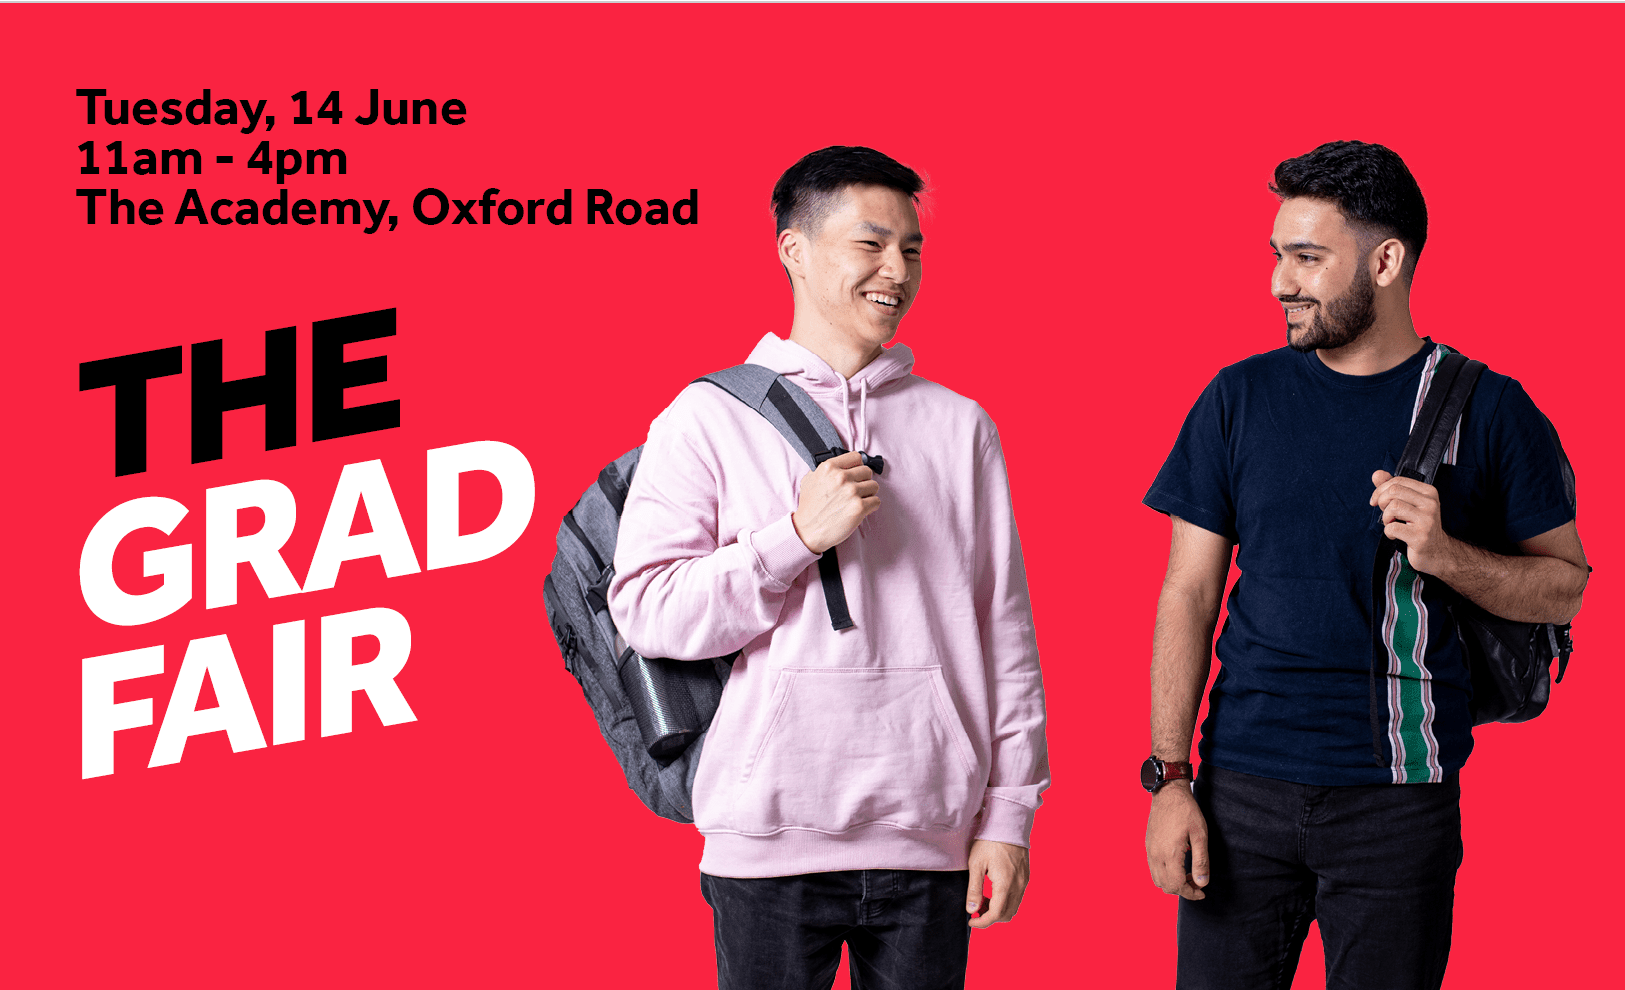 Two male students on a red background. Text reads Tuesday 14 June 11am-4pm The Academy Oxford Road: THE GRAD FAIR